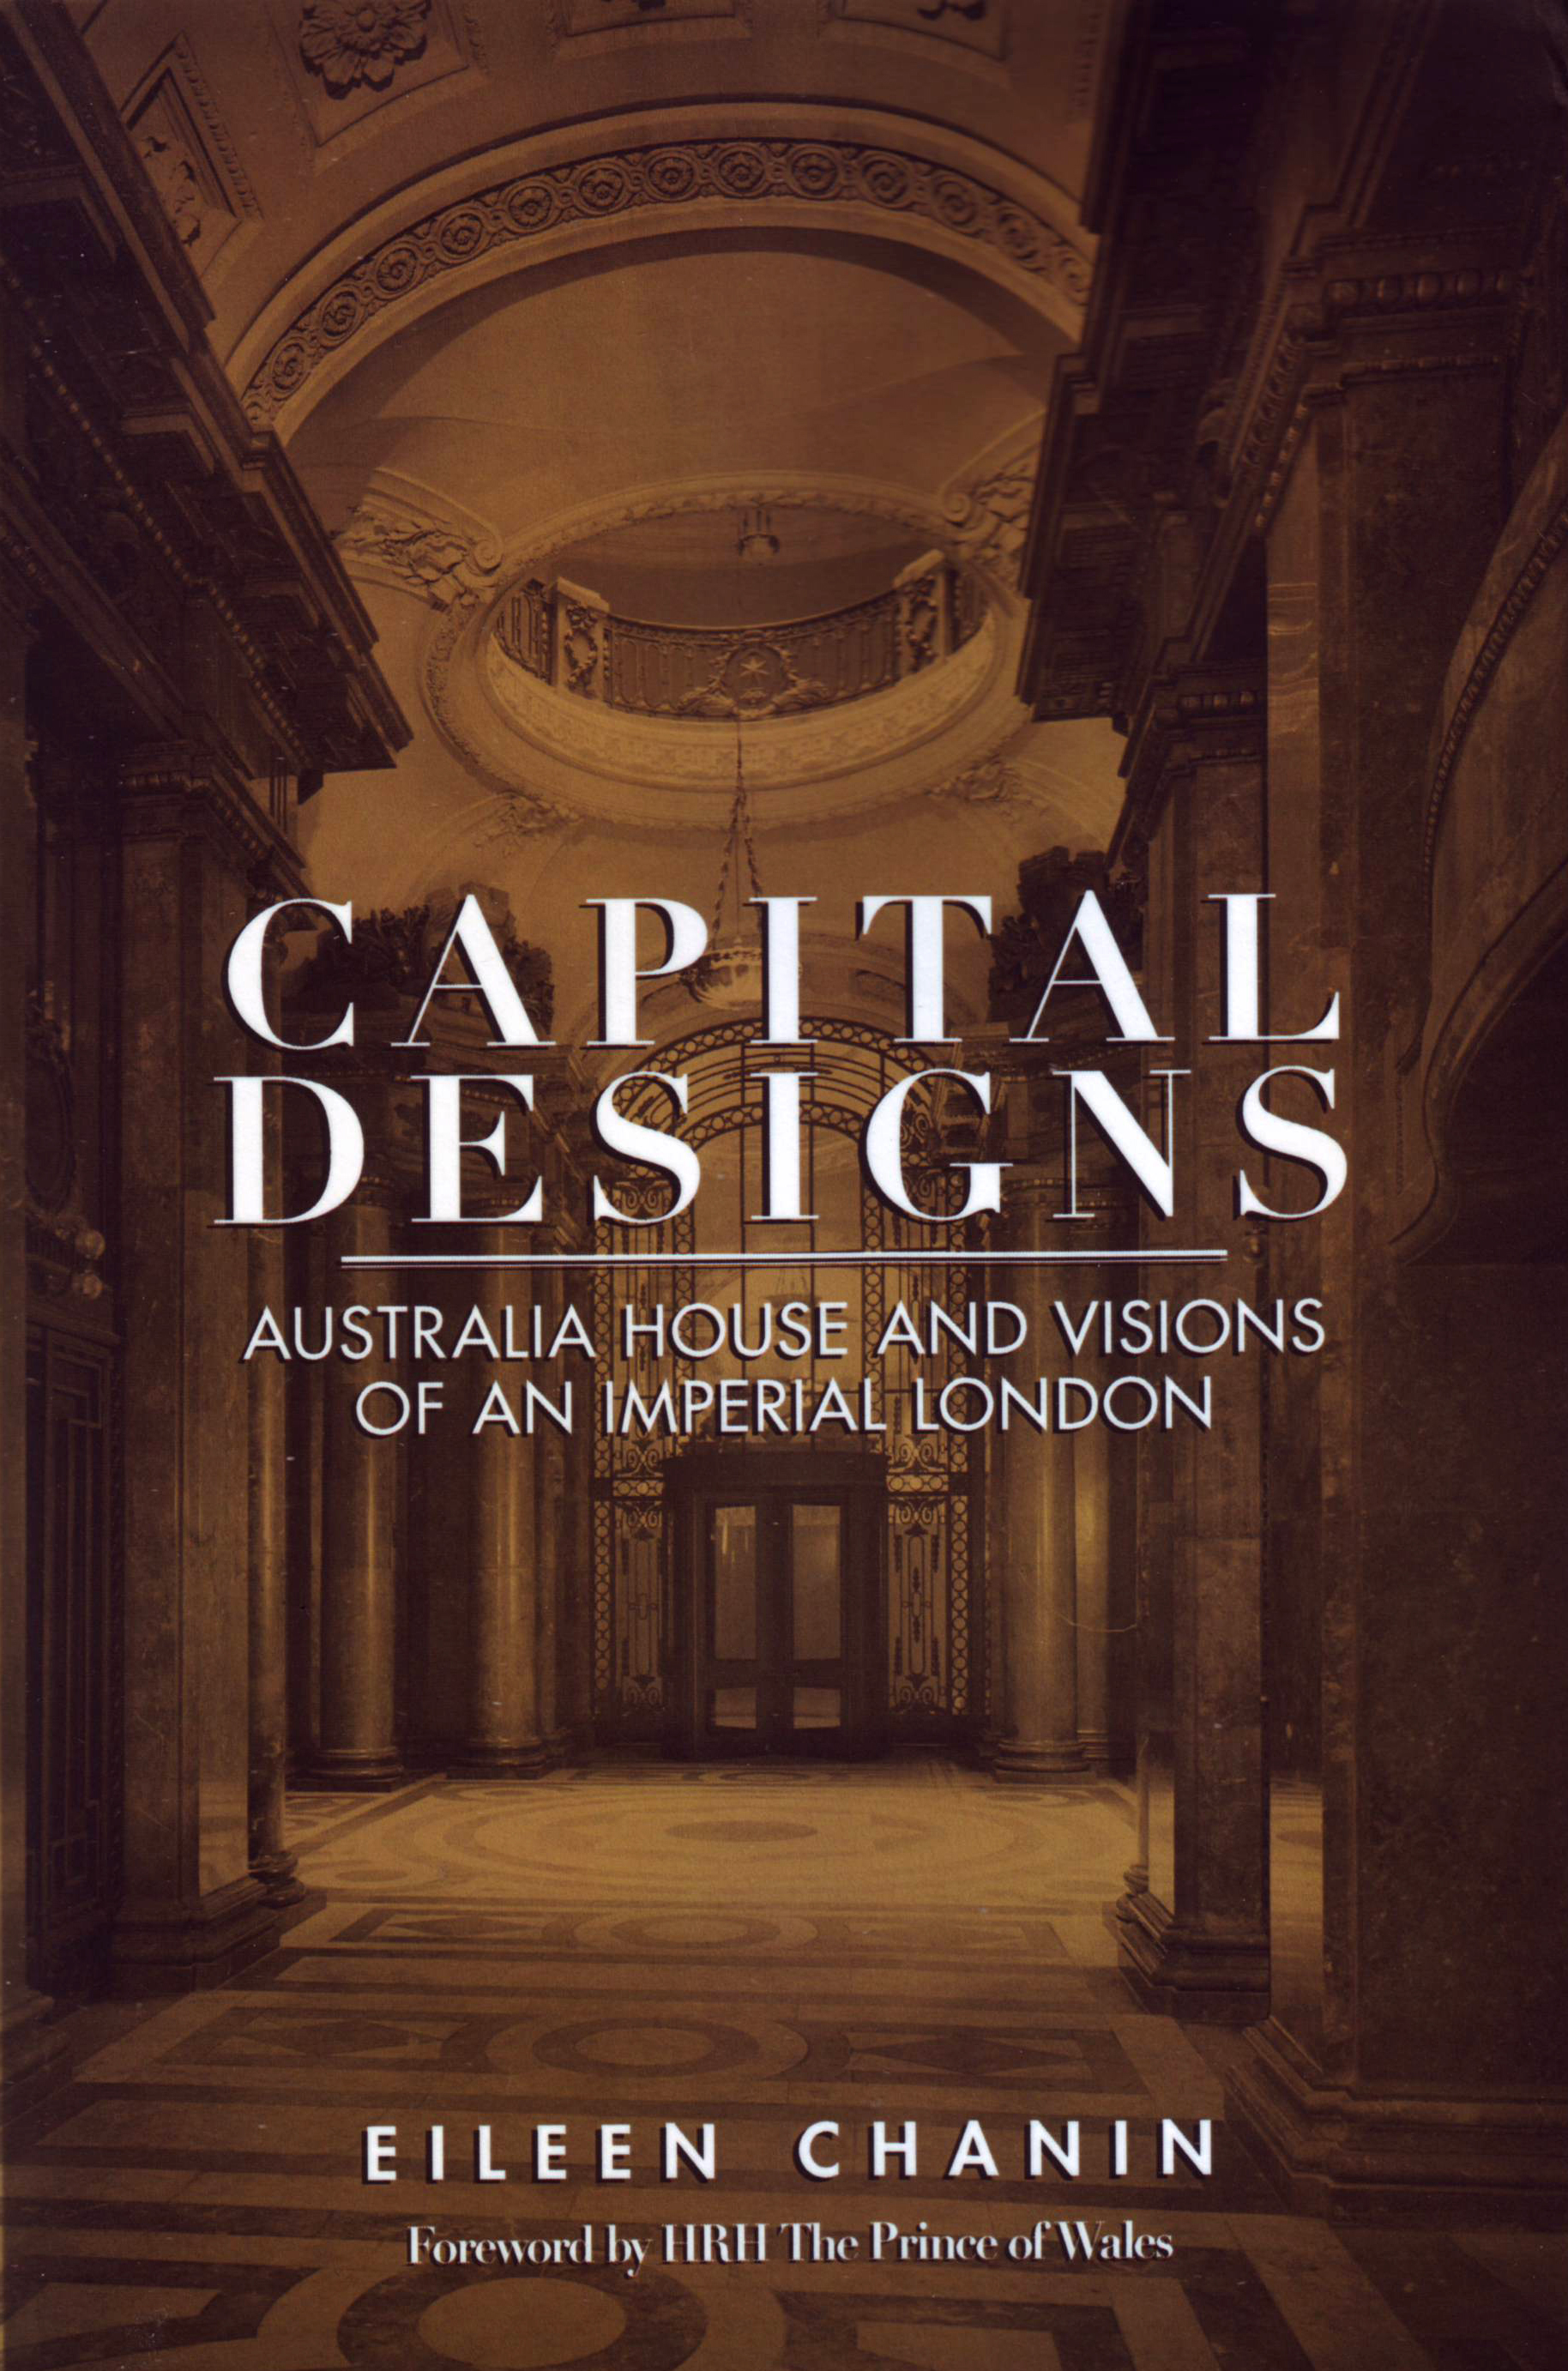 Capital Designs: Australia House and Visions of an Imperial